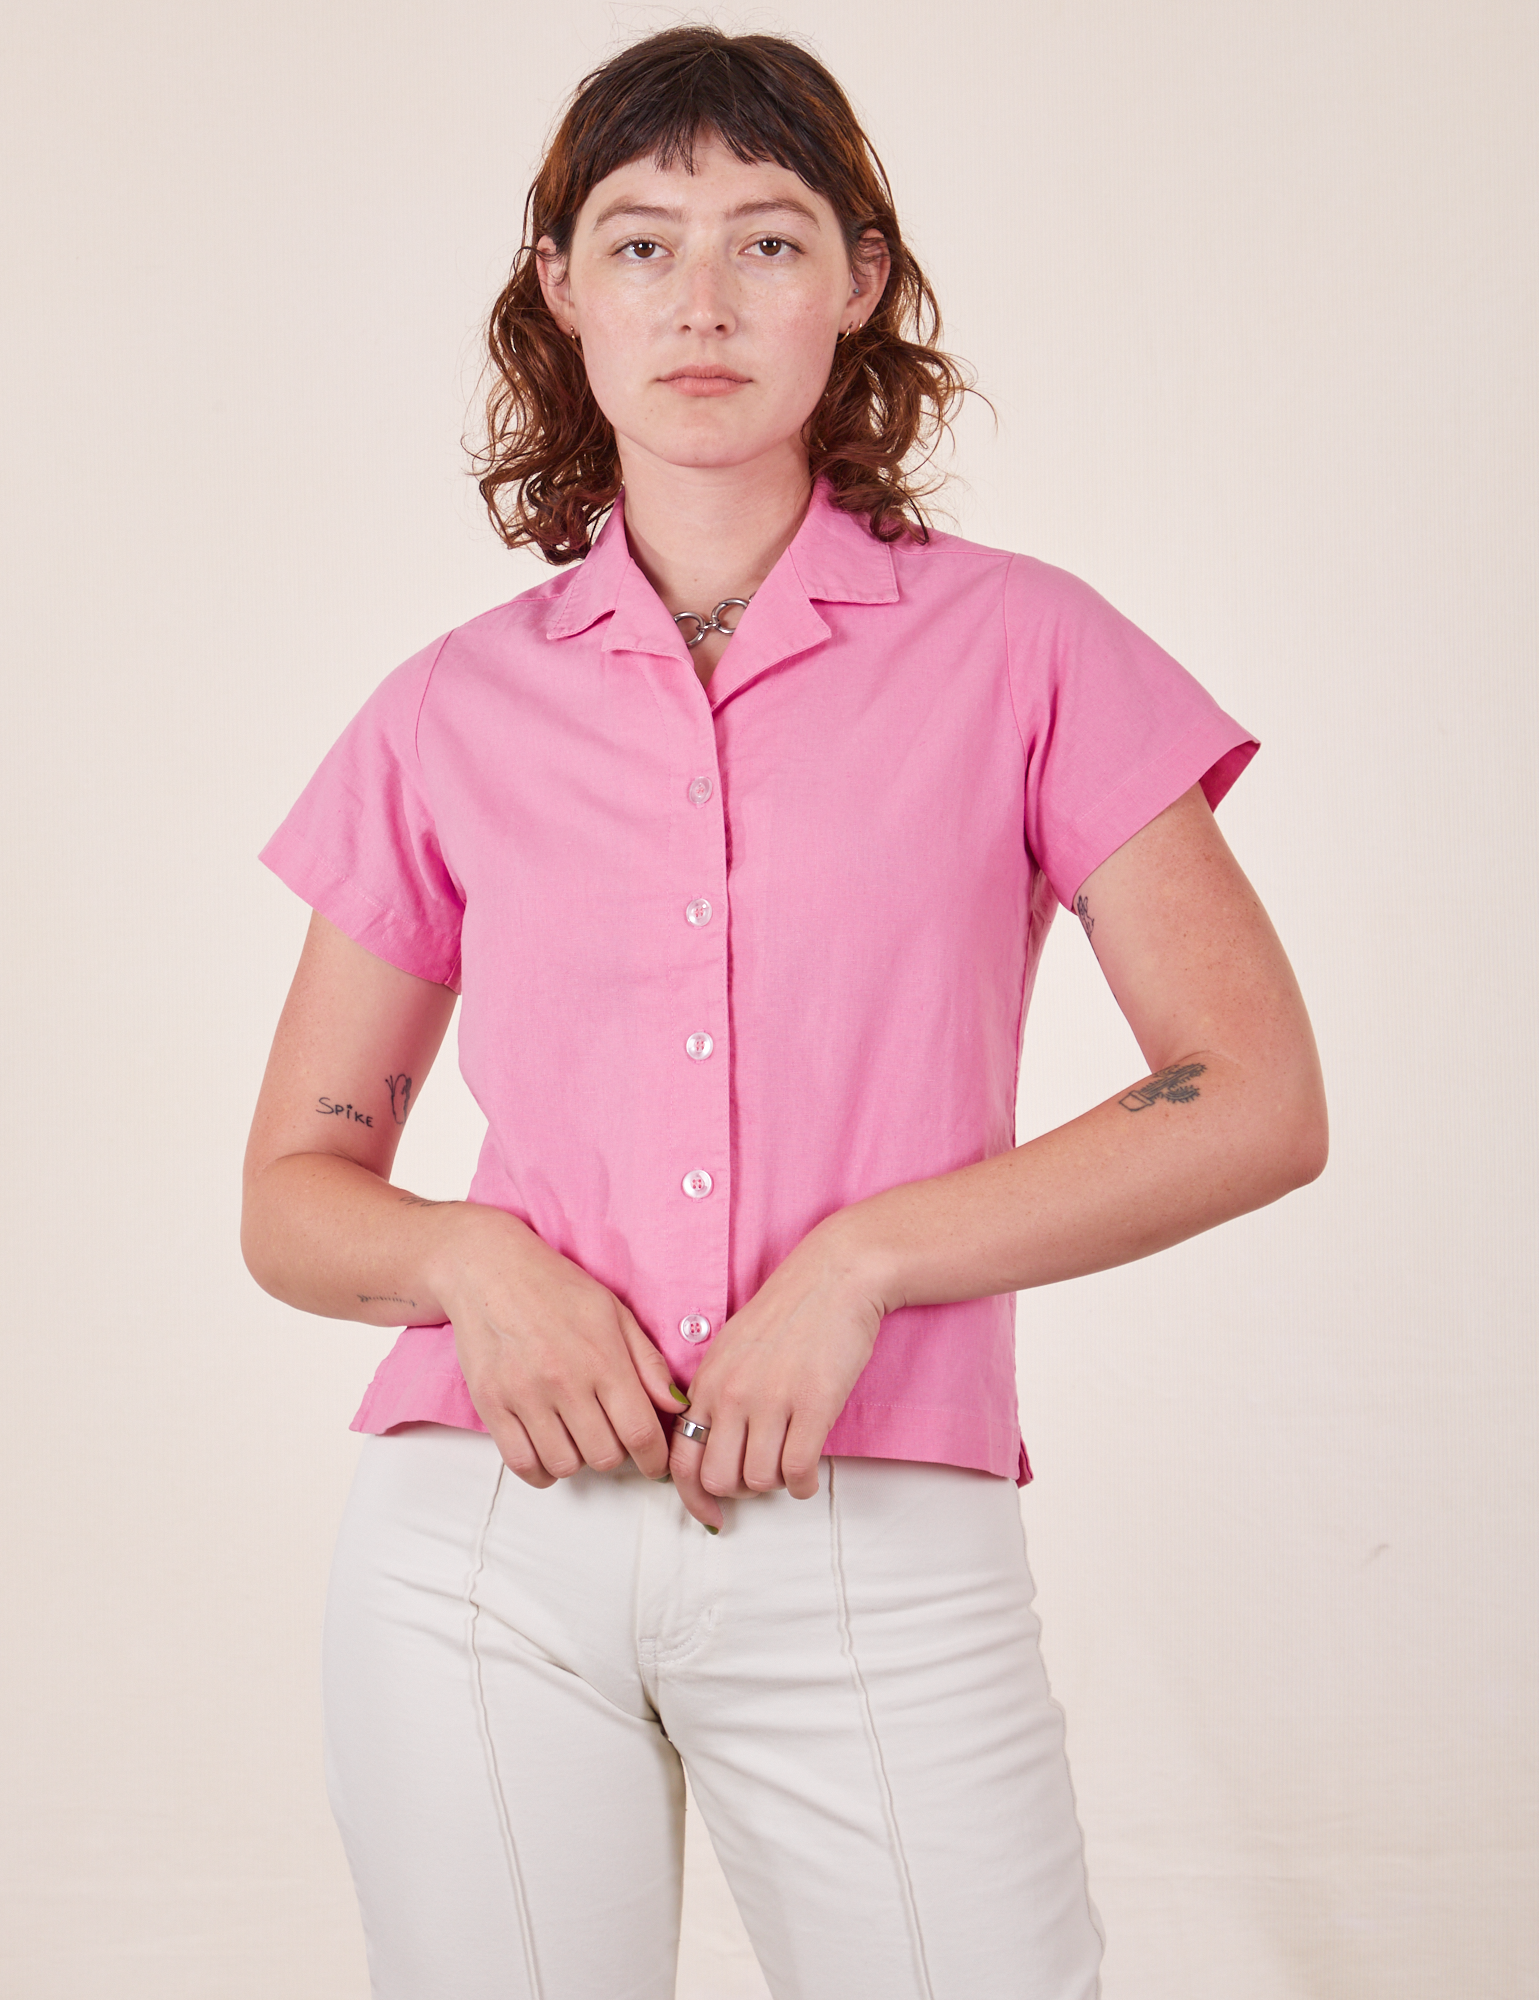 Alex is wearing size P Pantry Button-Up in Bubblegum Pink